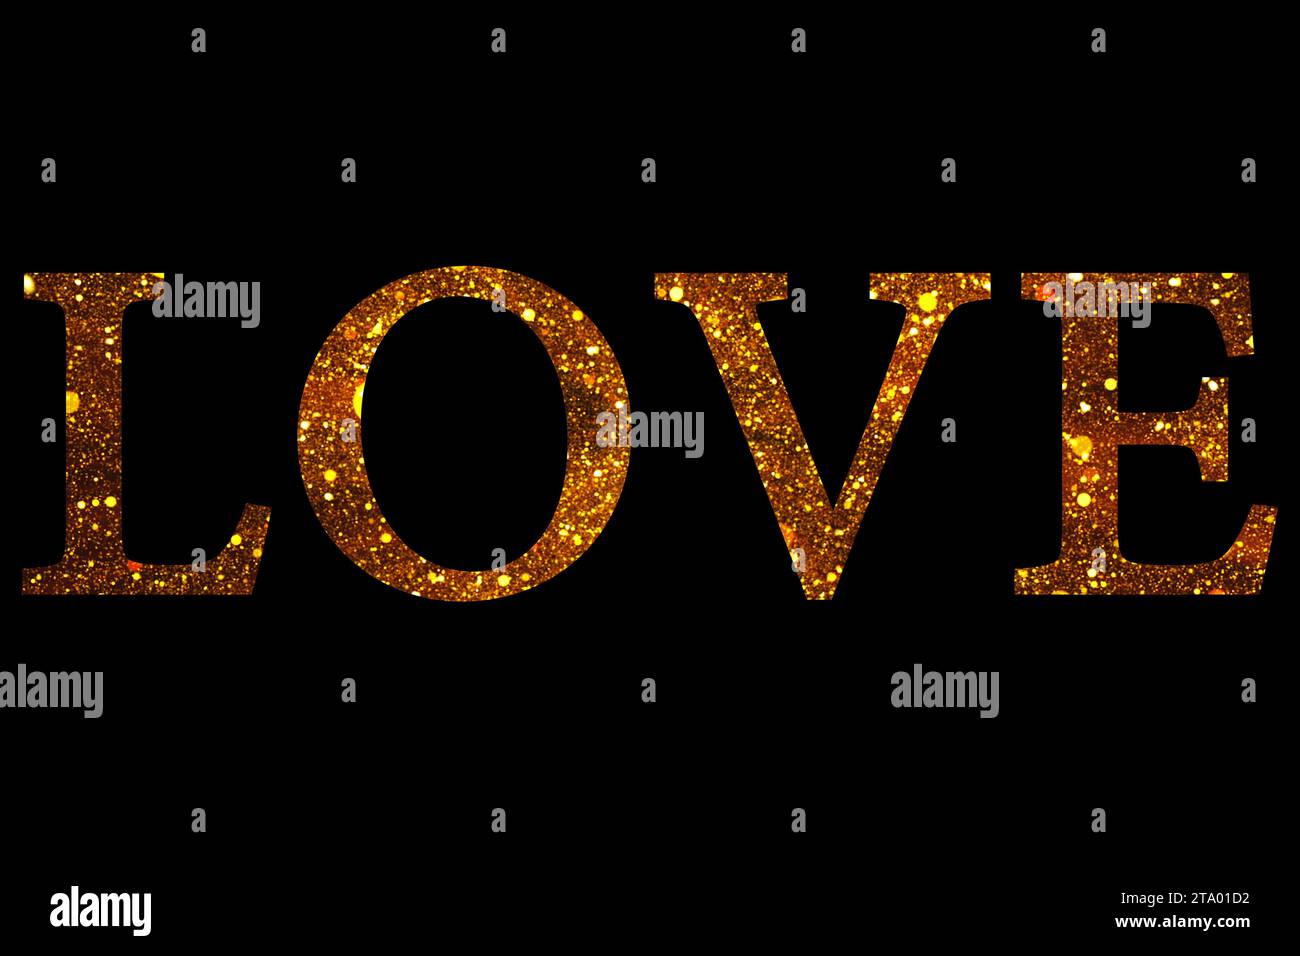 gold glitter sparkle particles love word shape on black background, holiday festive valentine day love concept Stock Photo